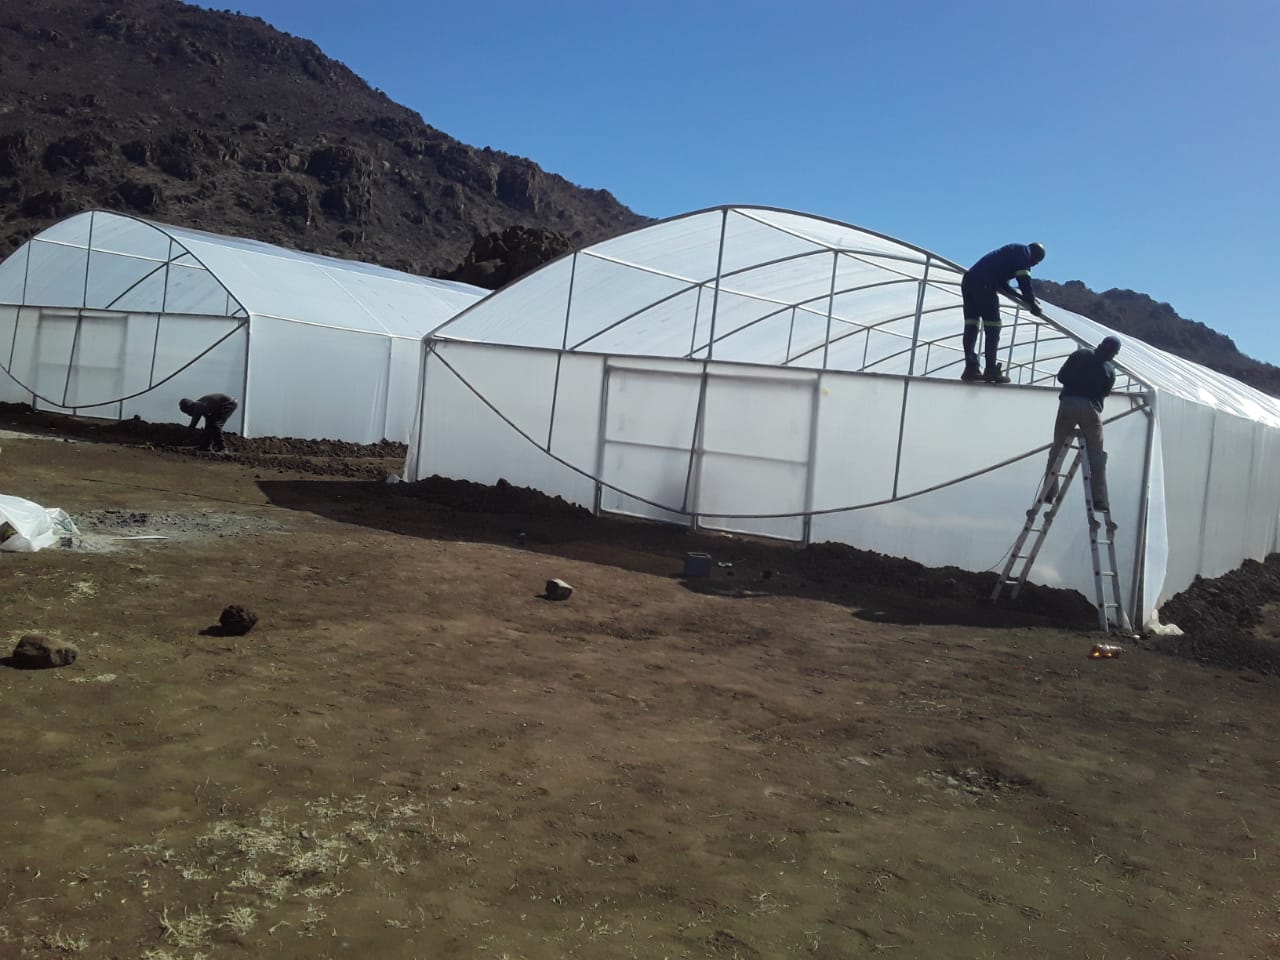 Greenhouses for sale